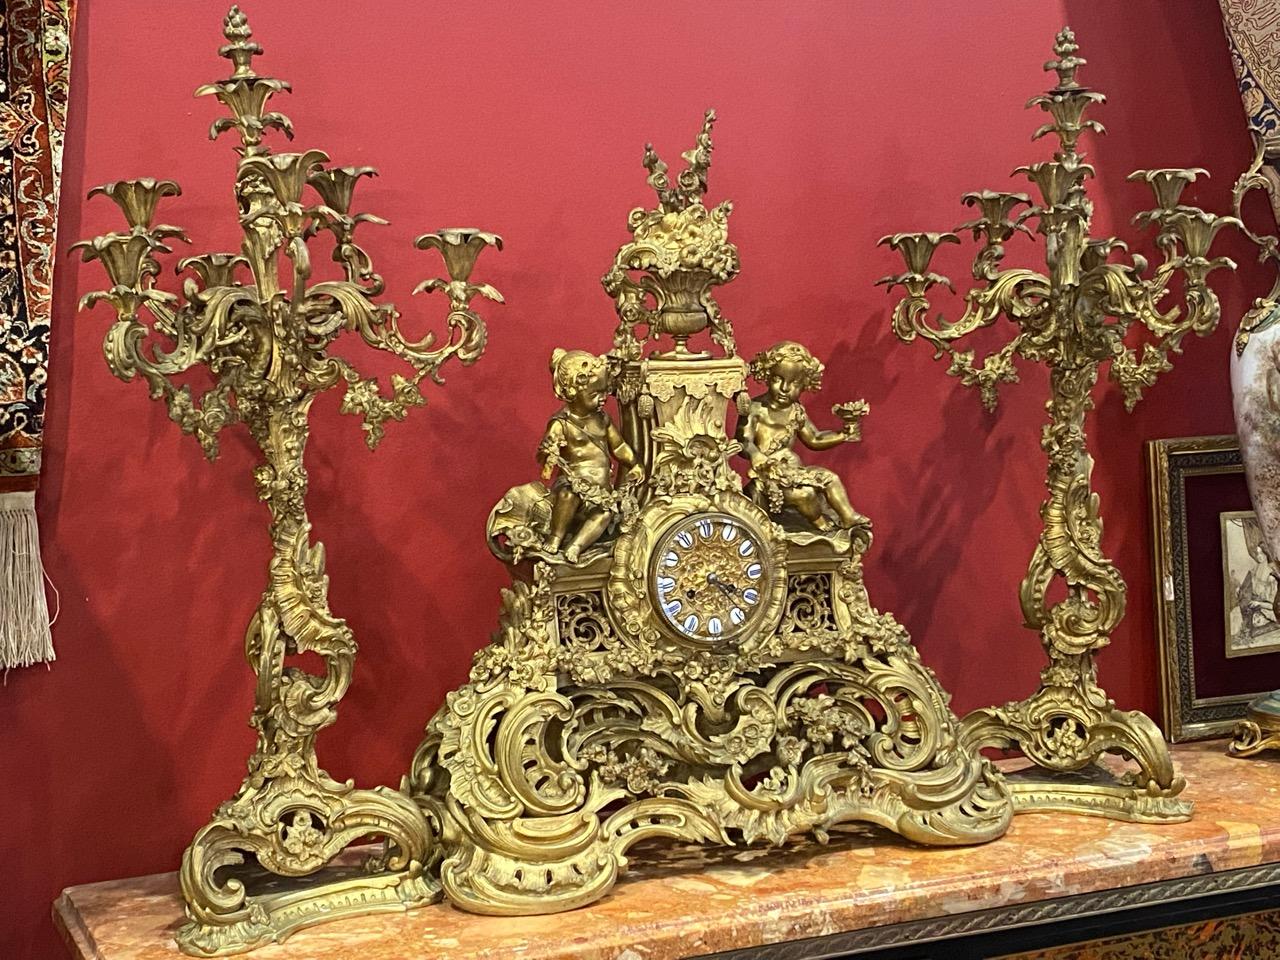 Wonderful imperial antique french gilt bronze garniture with clock and a pair of candelabras very finely hand worked with nice floral design and beautiful angels, very decorative for a palace house.